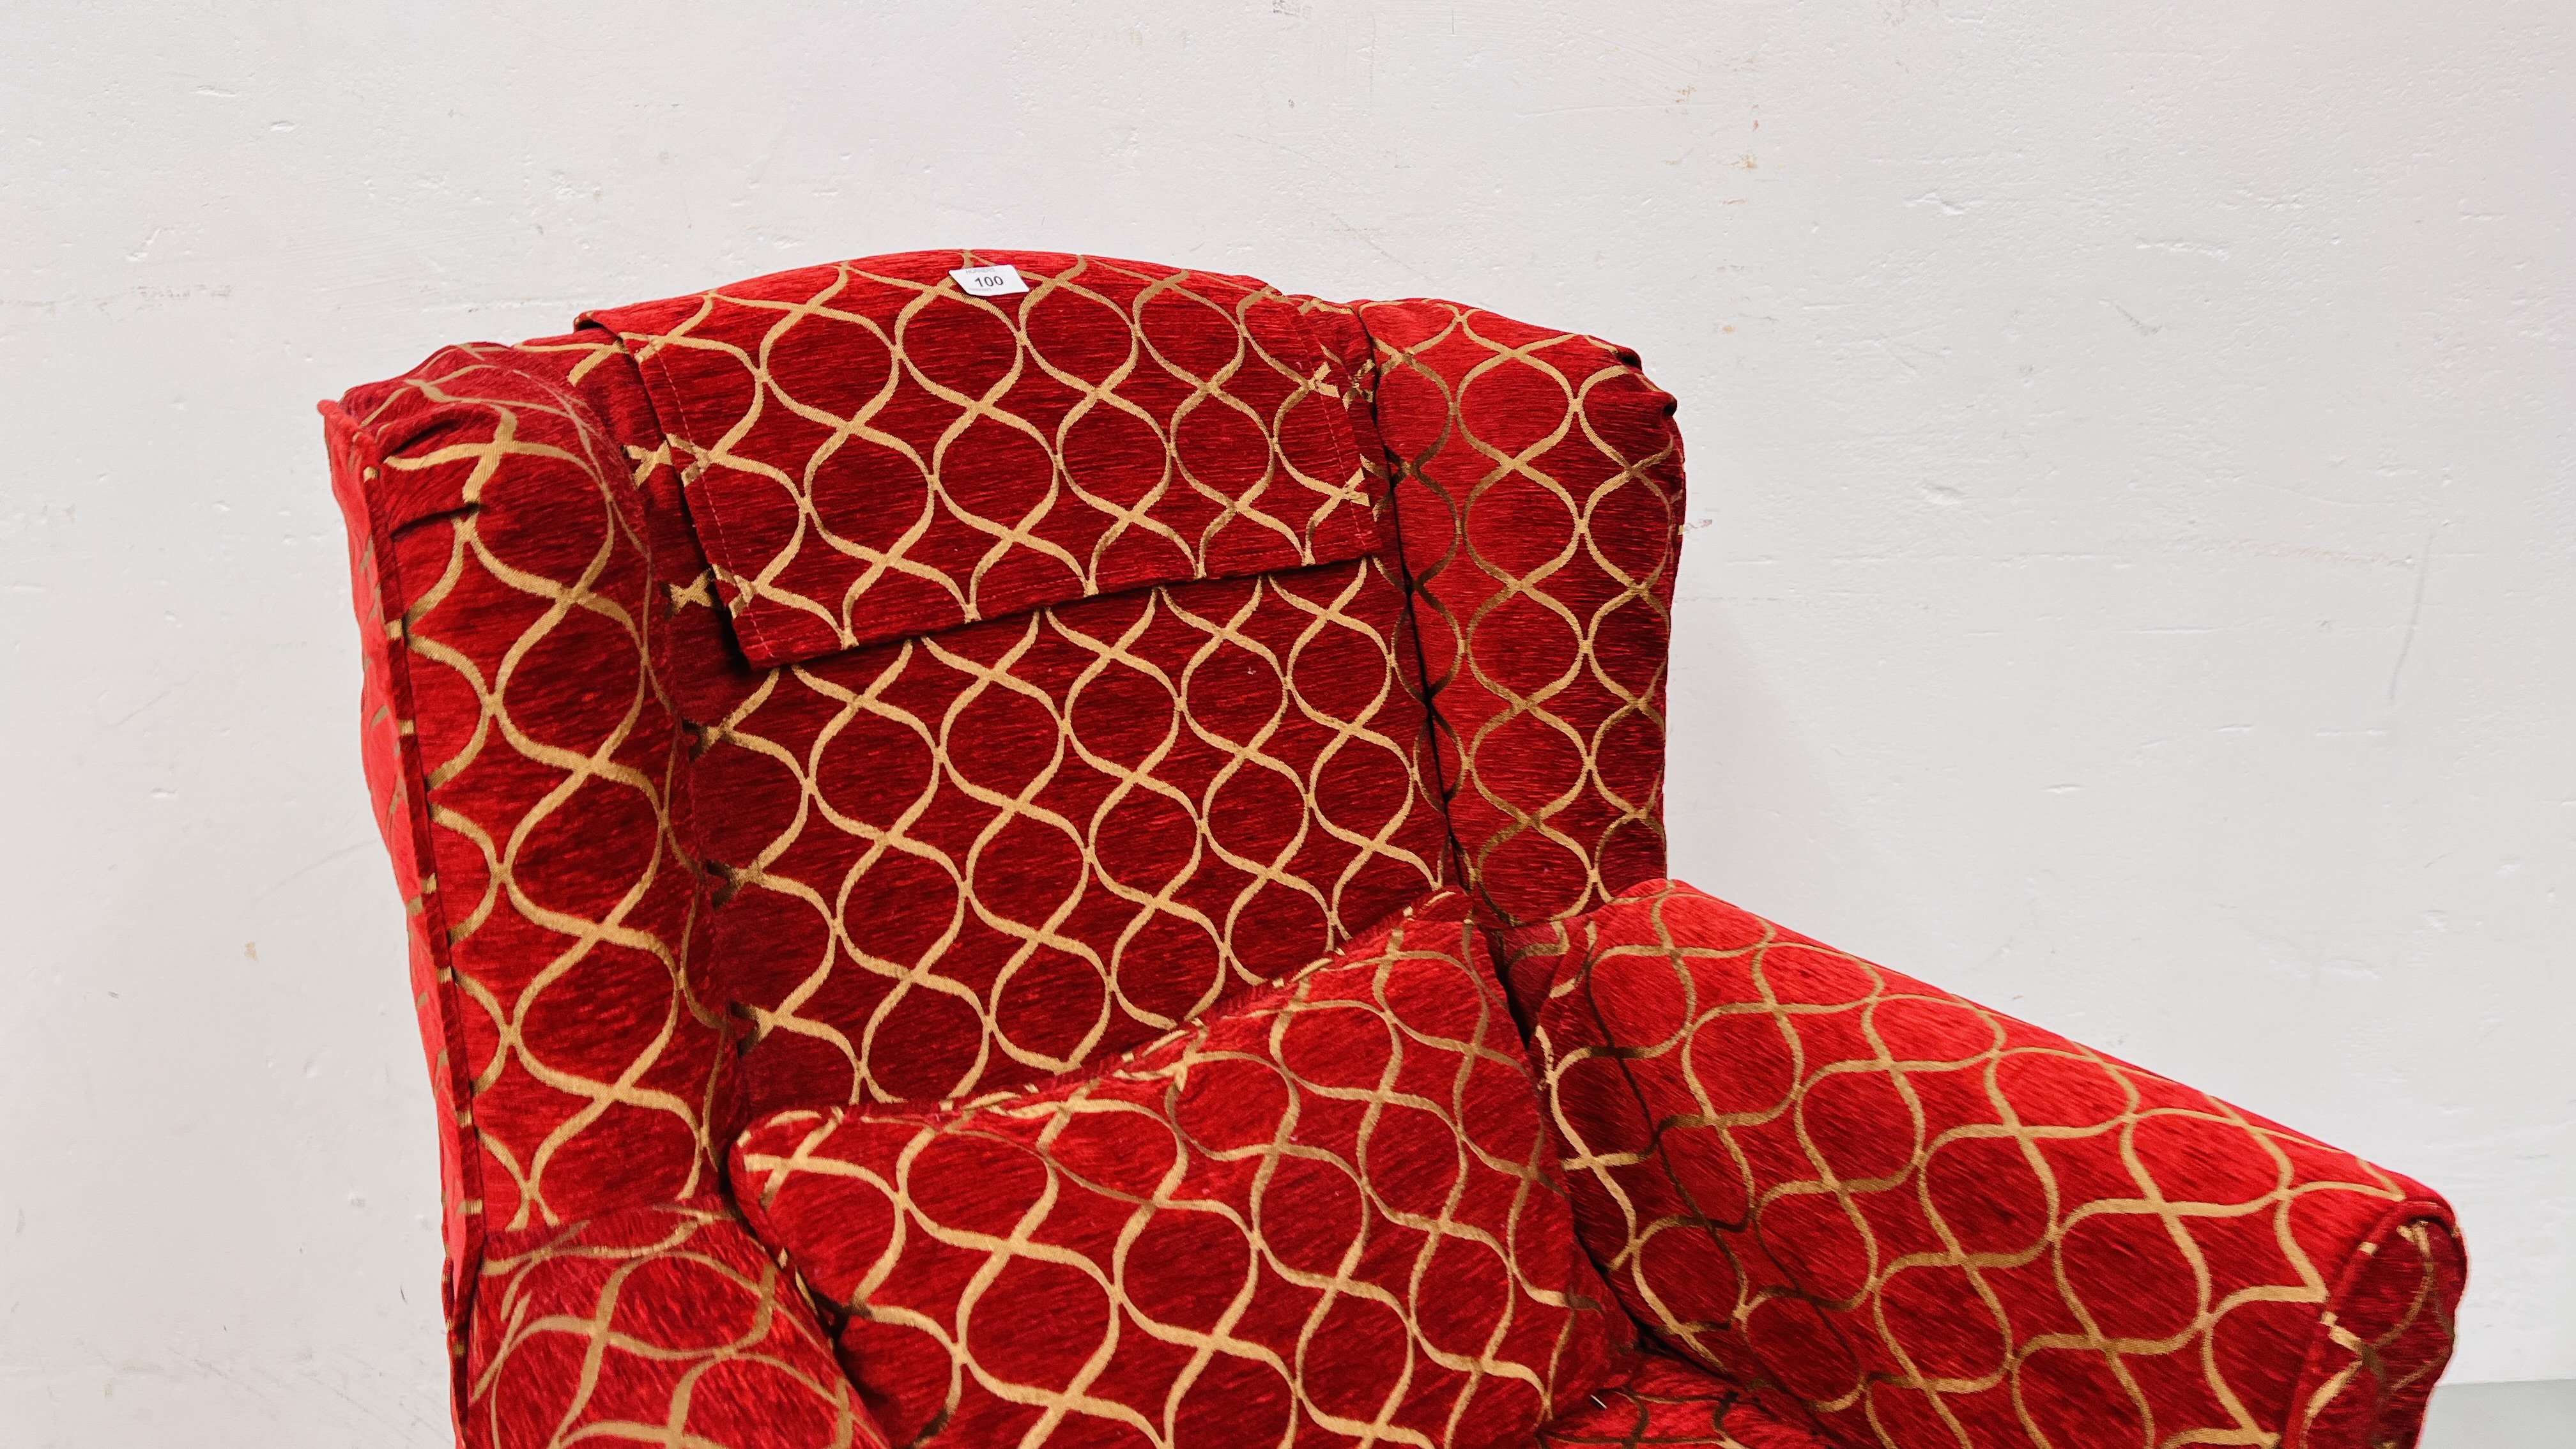 A MODERN WING BACK CHAIR UPHOLSTERED IN RED AND GOLD - Image 2 of 7